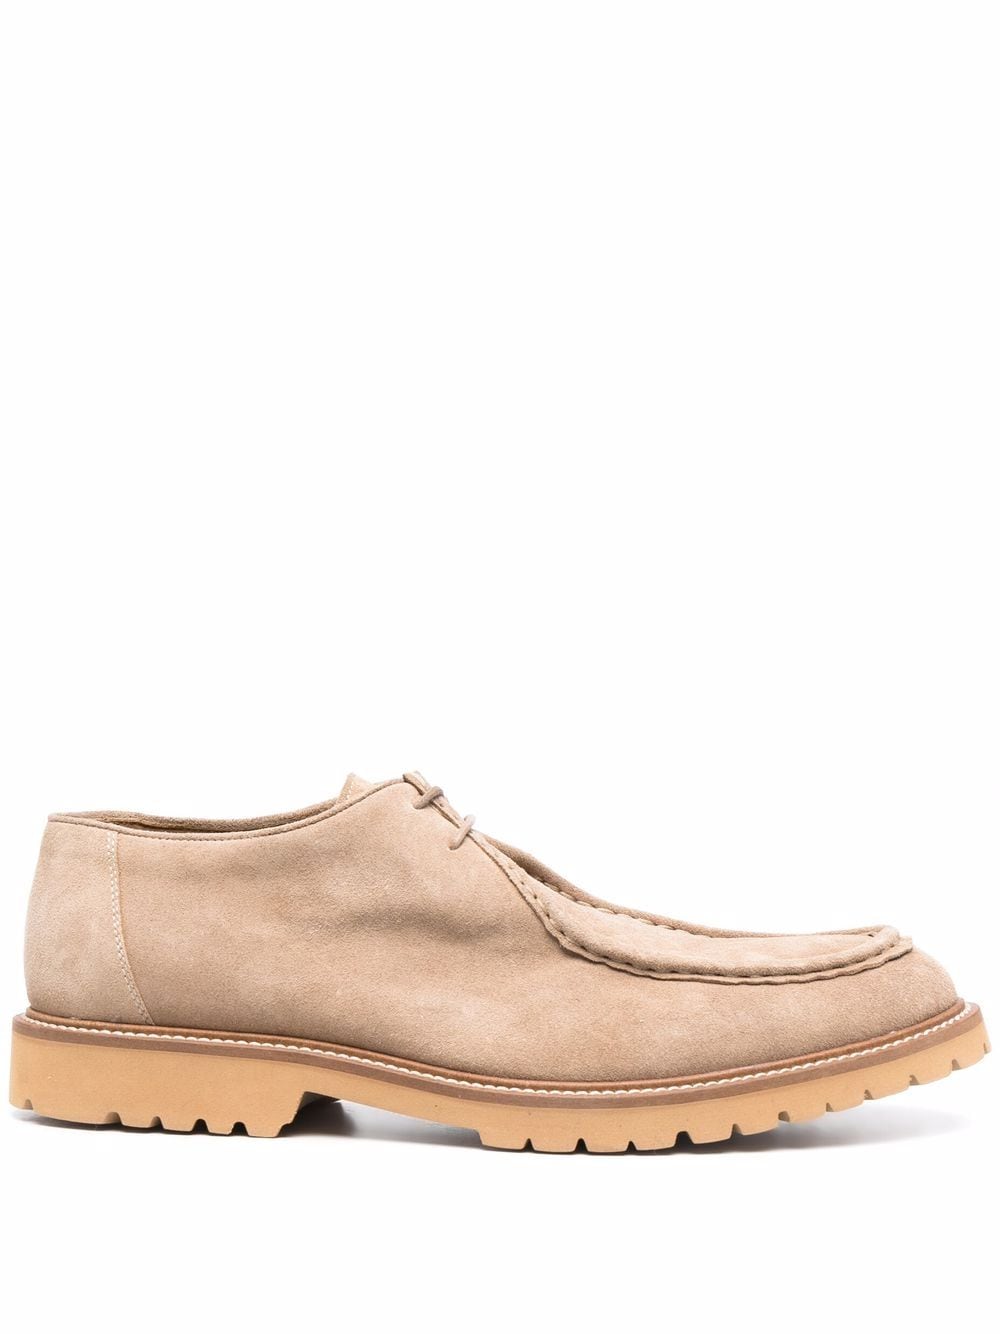 Shop Eleventy suede lace-up shoes with Express Delivery - FARFETCH